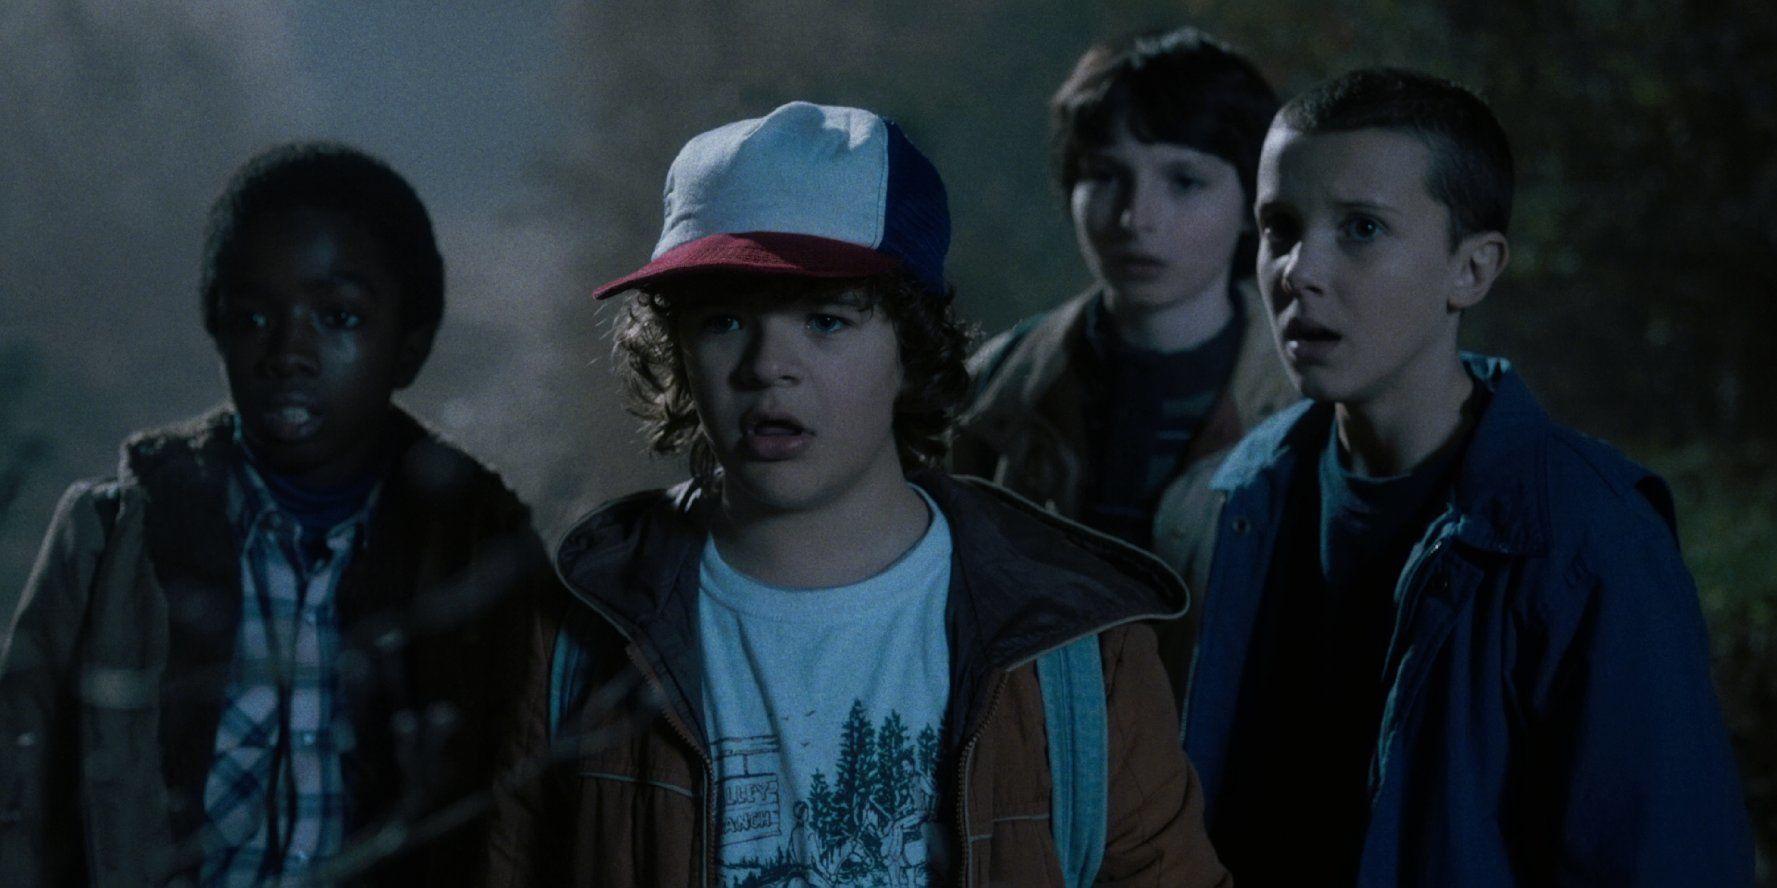 Why Dustin From 'Stranger Things' Is Missing His Teeth